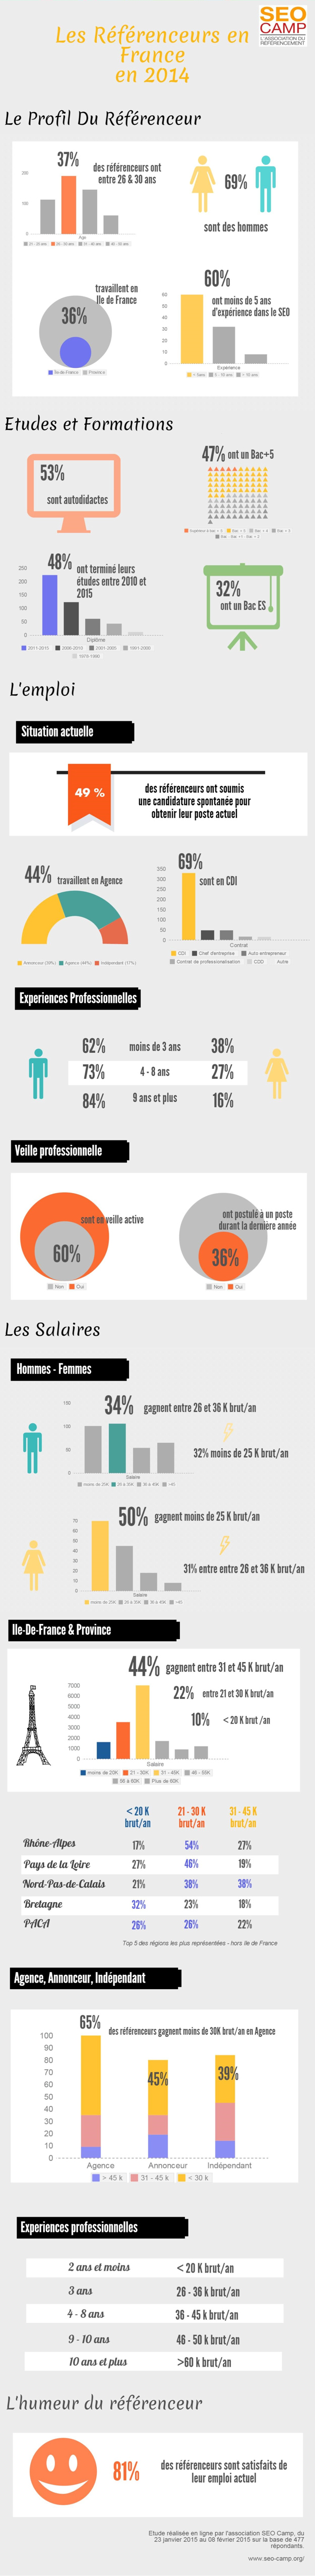 infographie-profil-salaire-referenceur-france-2015